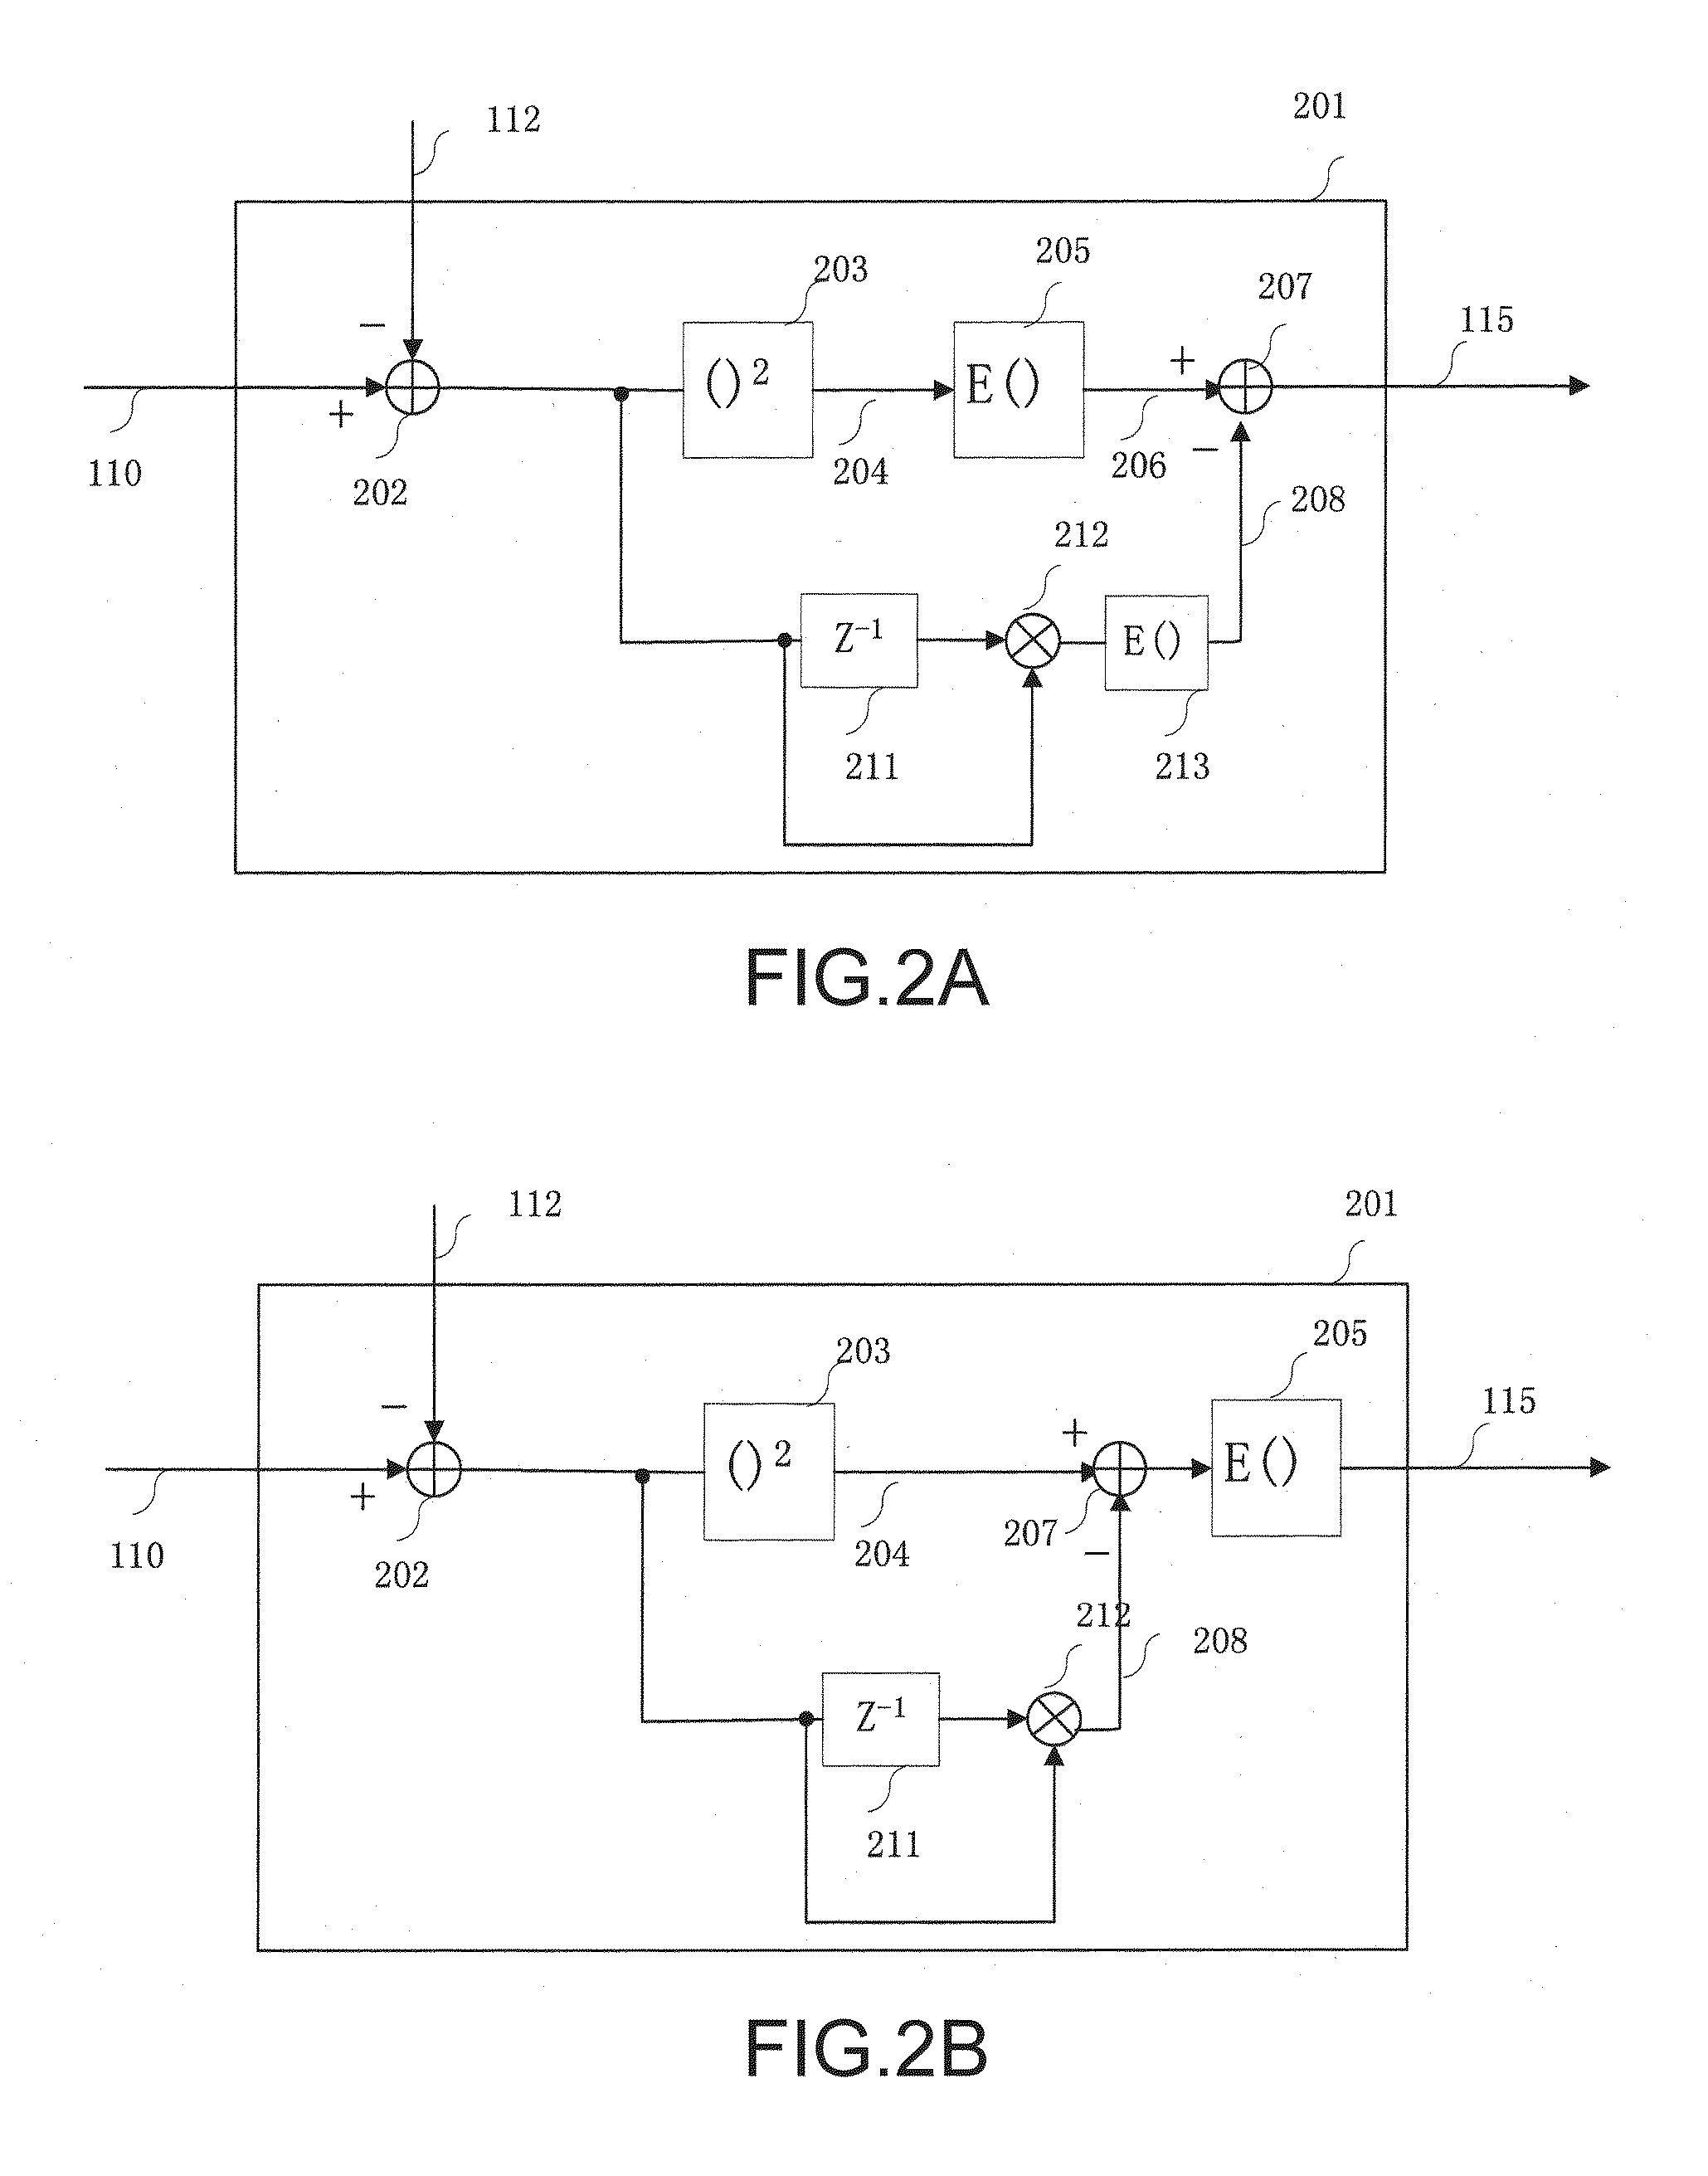 Optical coherent receiver, apparatus for and method of monitoring performance thereof